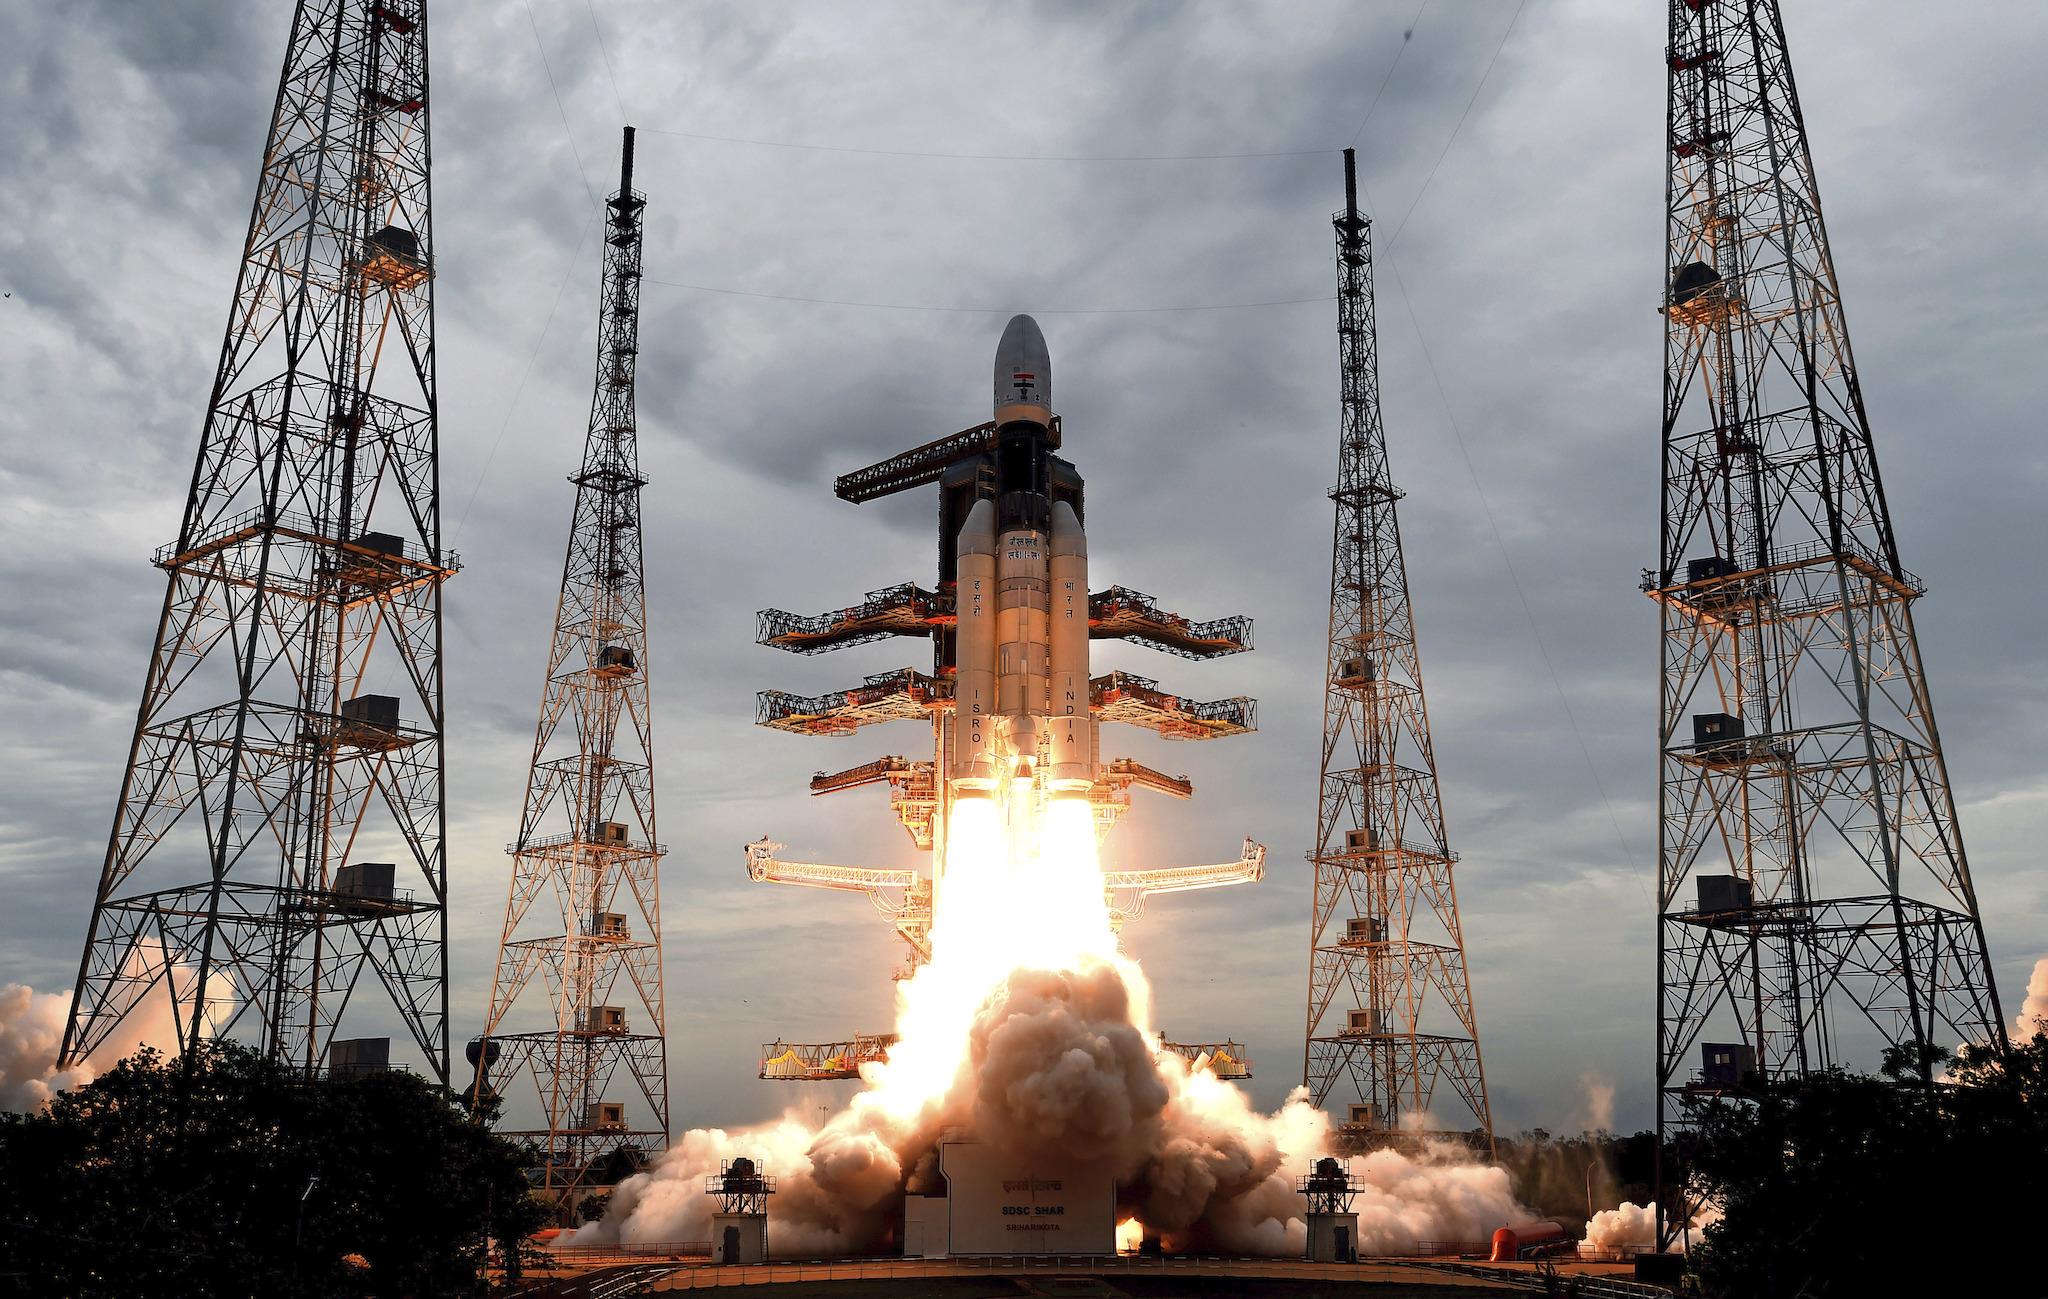 This photo released by the Indian Space Research Organization (ISRO) shows its Geosynchronous Satellite launch Vehicle (GSLV) MkIII carrying Chandrayaan-2 lift off from Satish Dhawan Space center in Sriharikota, India